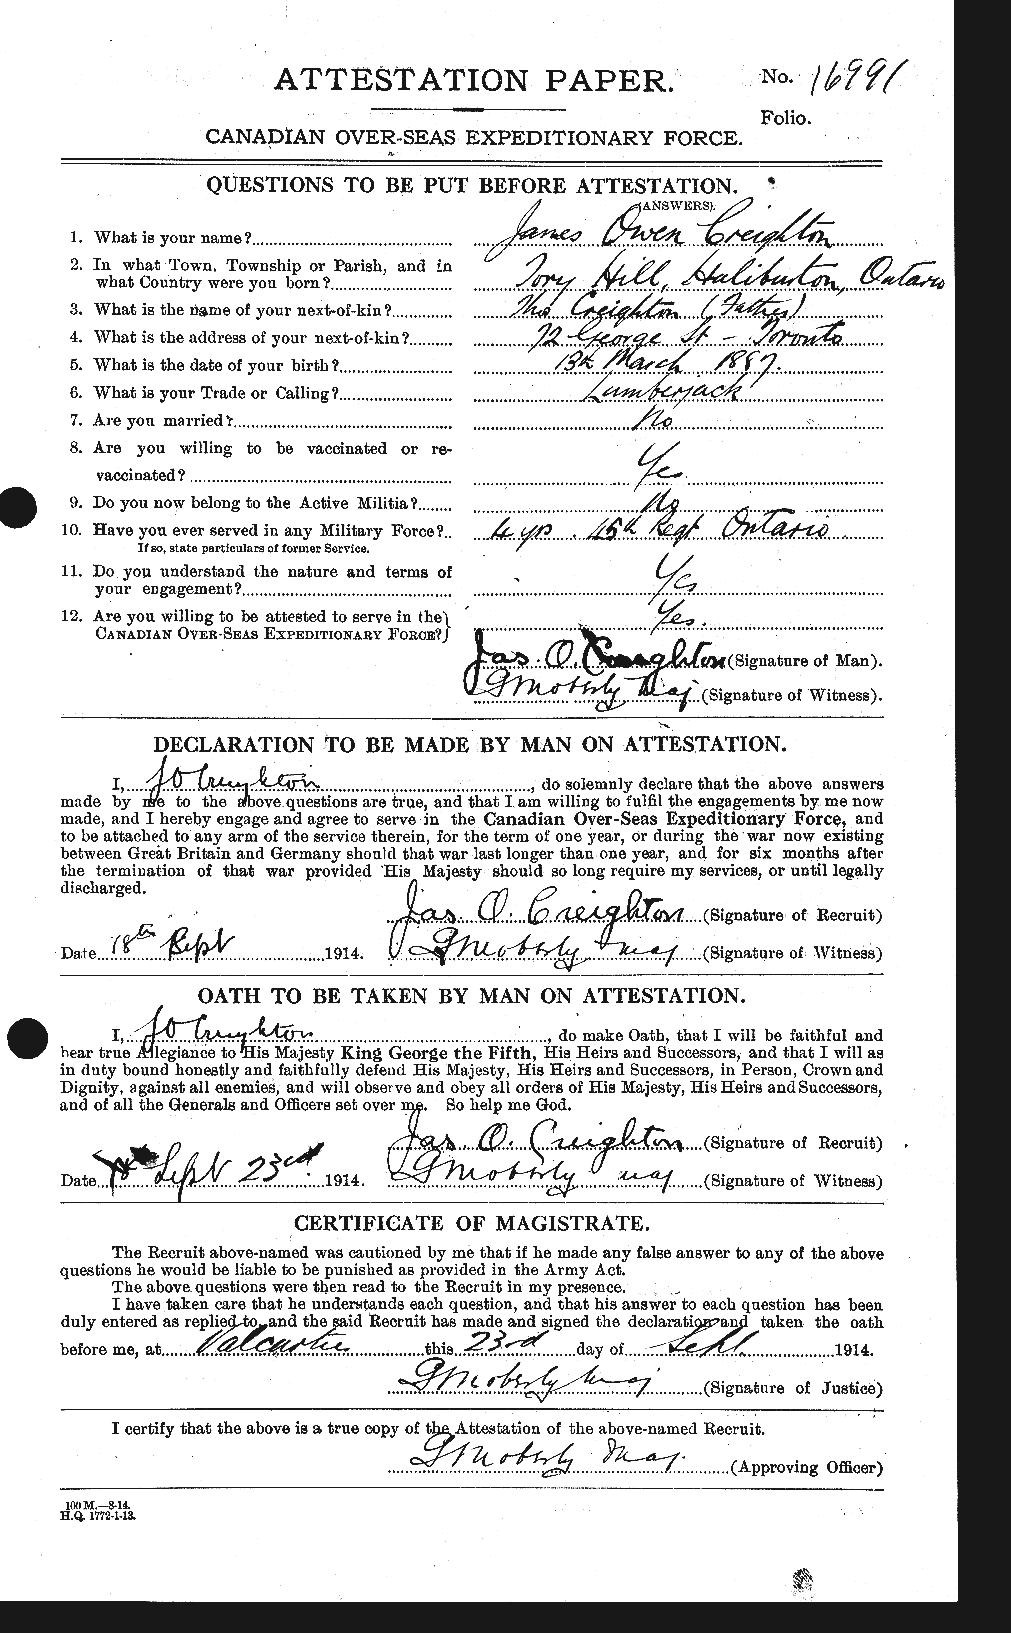 Personnel Records of the First World War - CEF 063070a